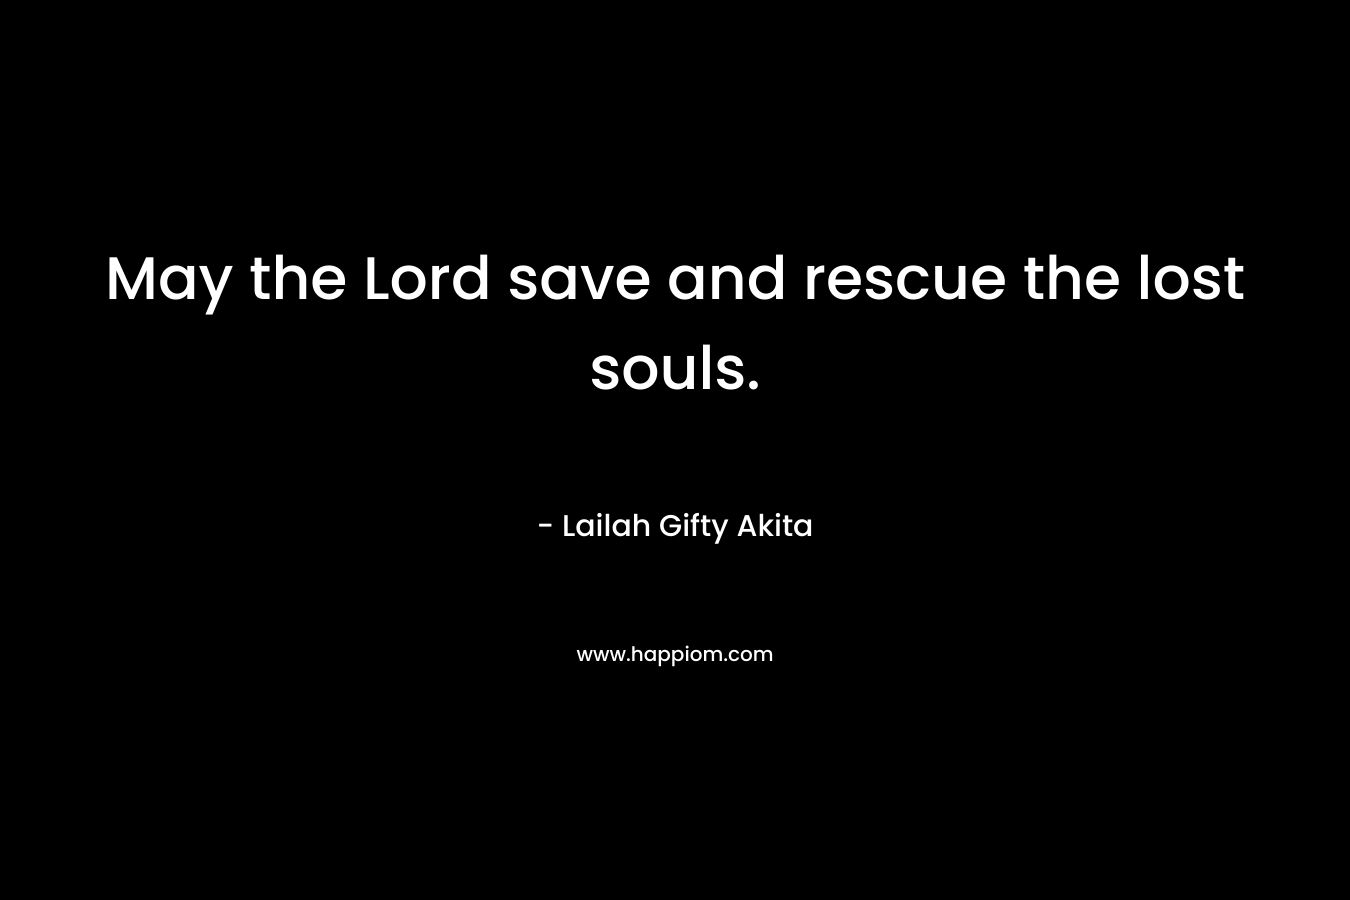 May the Lord save and rescue the lost souls.